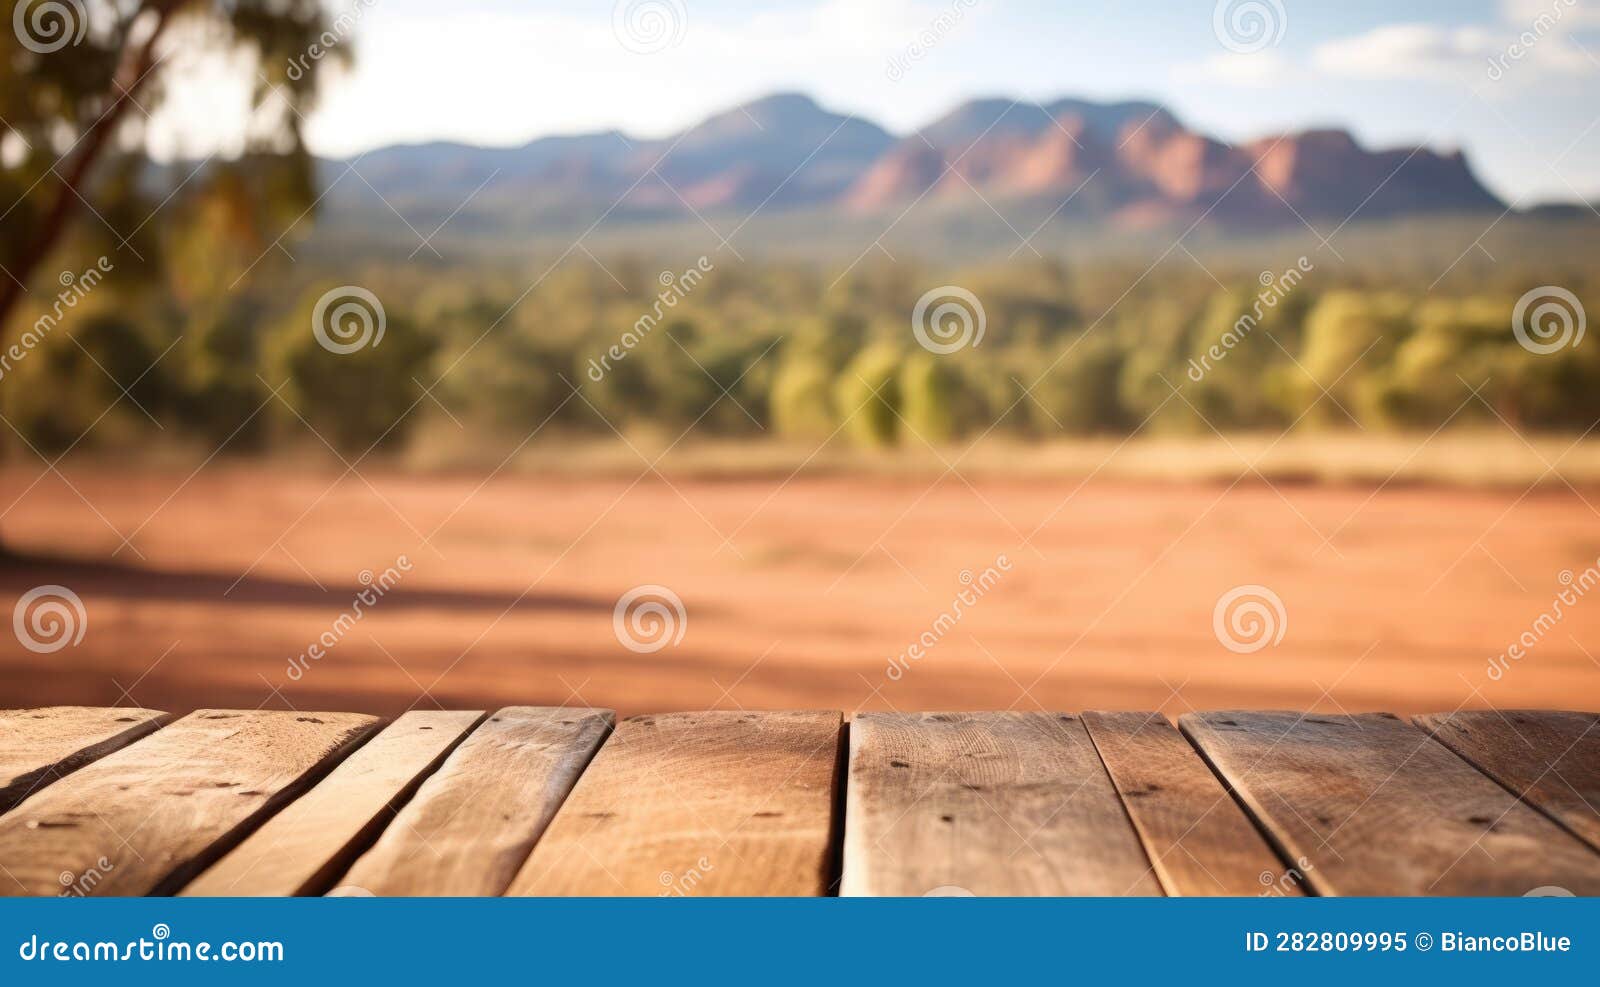 the empty wooden table top with blur background of australian outback. exuberant.